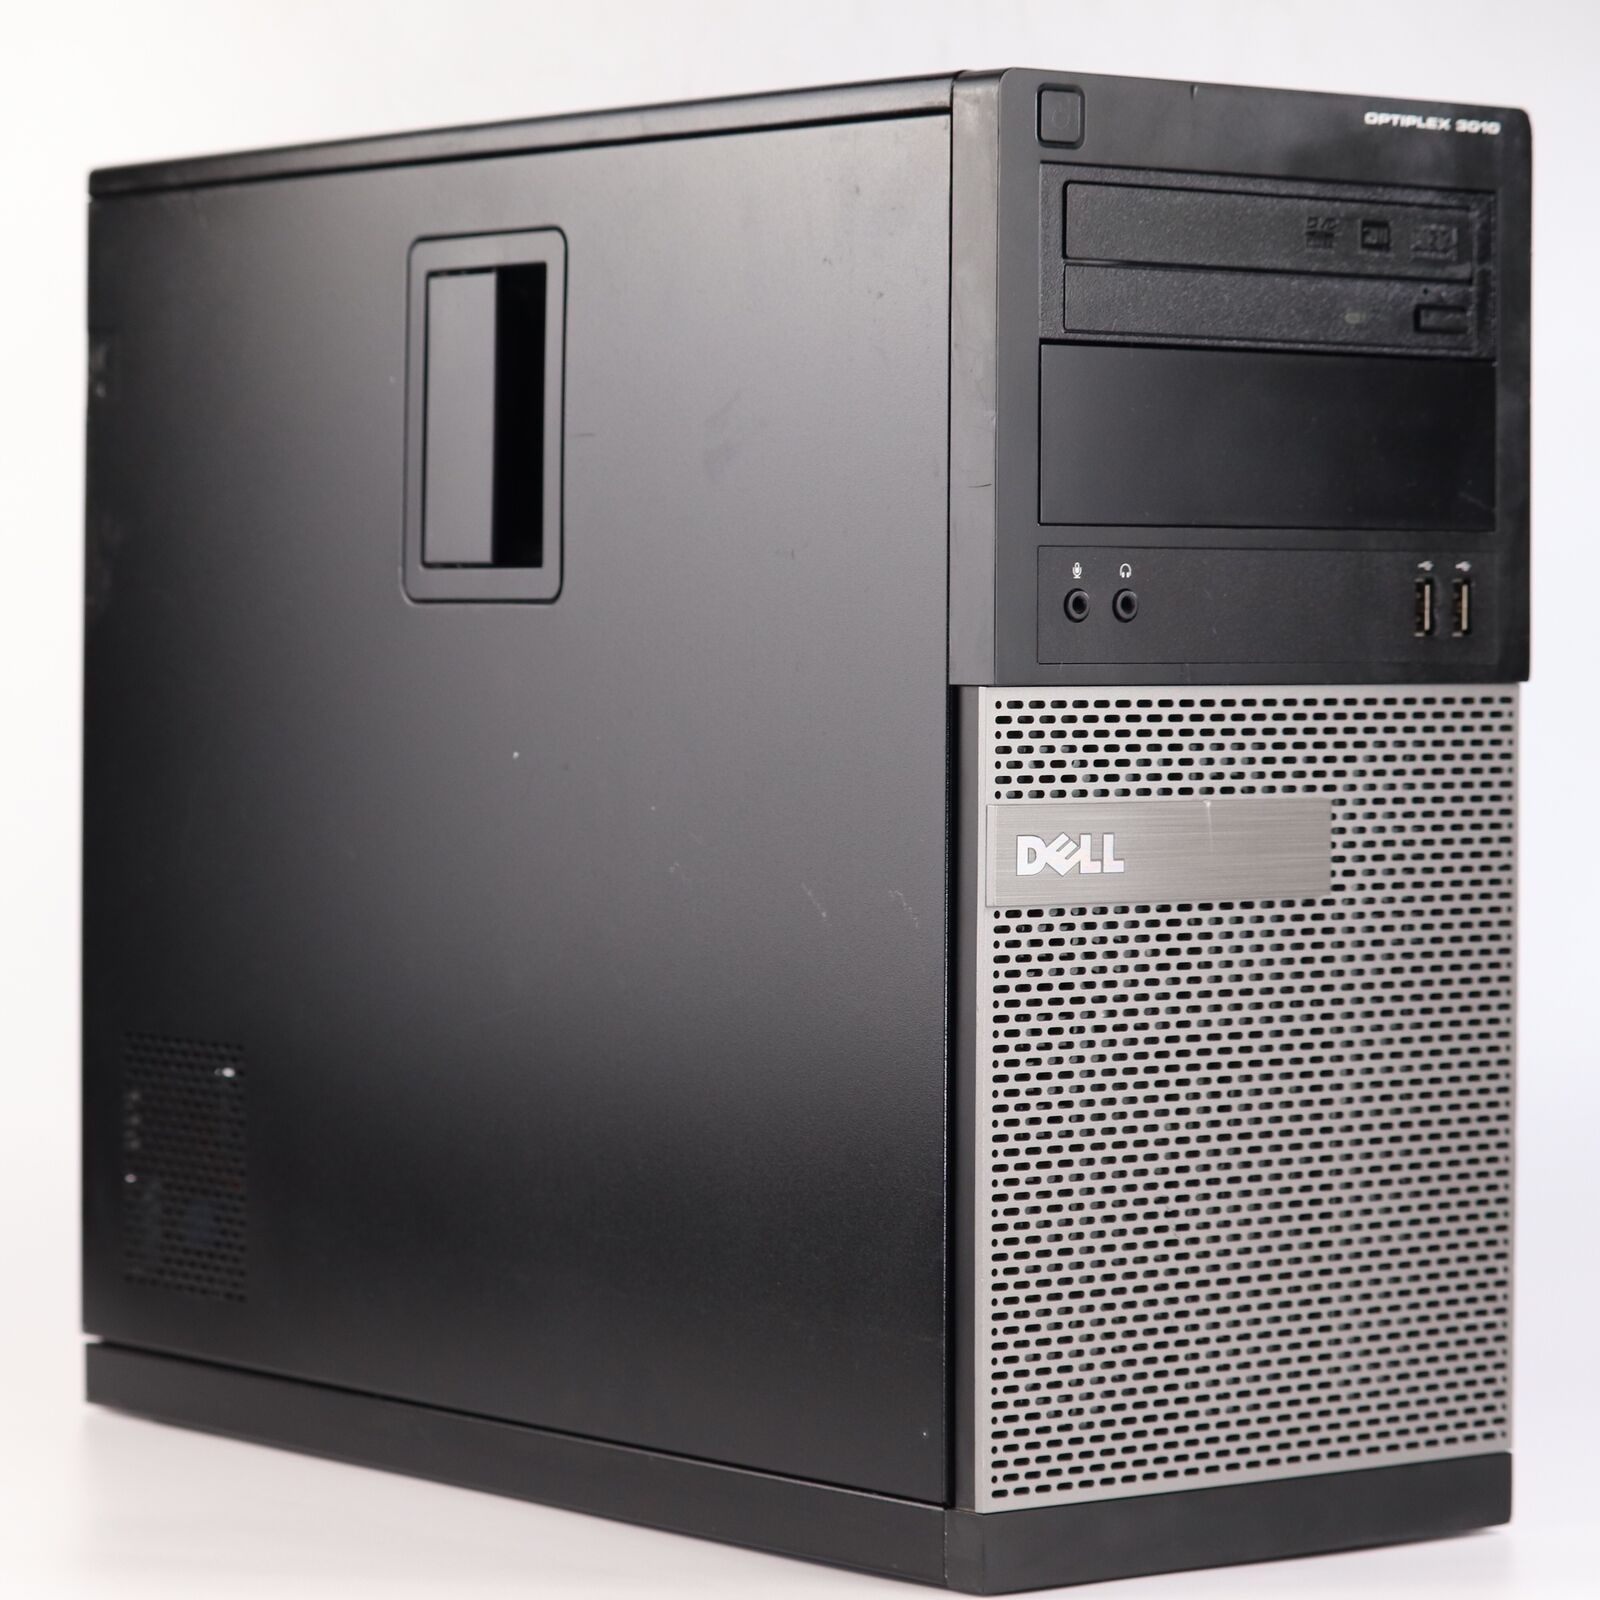 Dell OptiPlex 3010 Mini Tower i5-3470, Choose your own specs - Refurbished